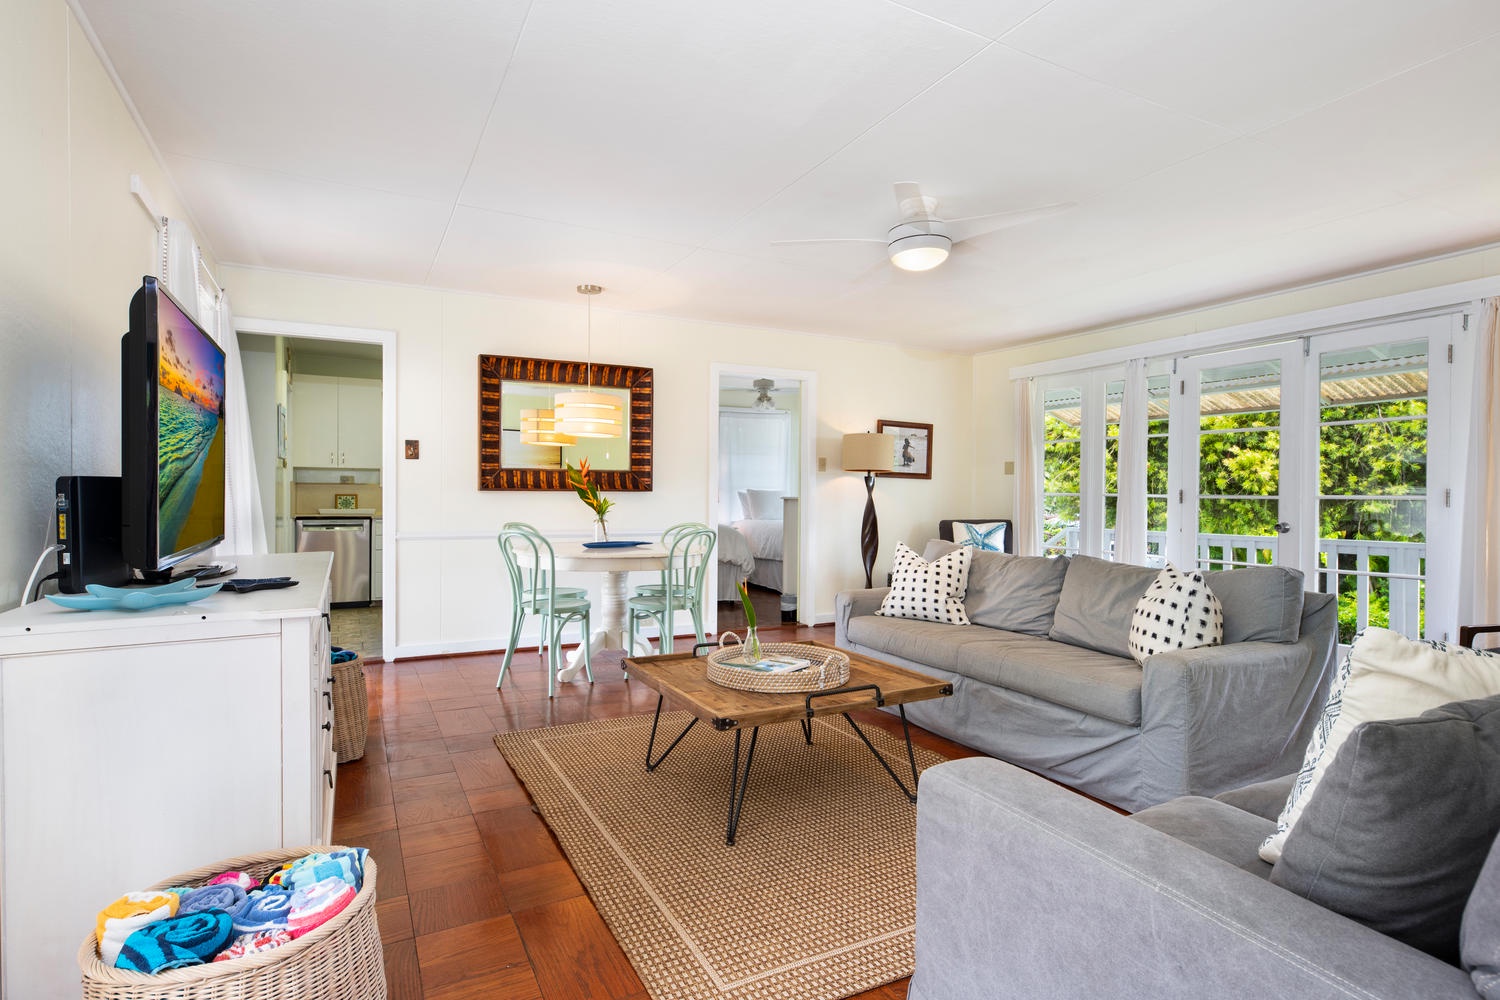 Kailua Vacation Rentals, Lanikai Cottage - Main house living room opens to the front and back yard and in-ground pool!